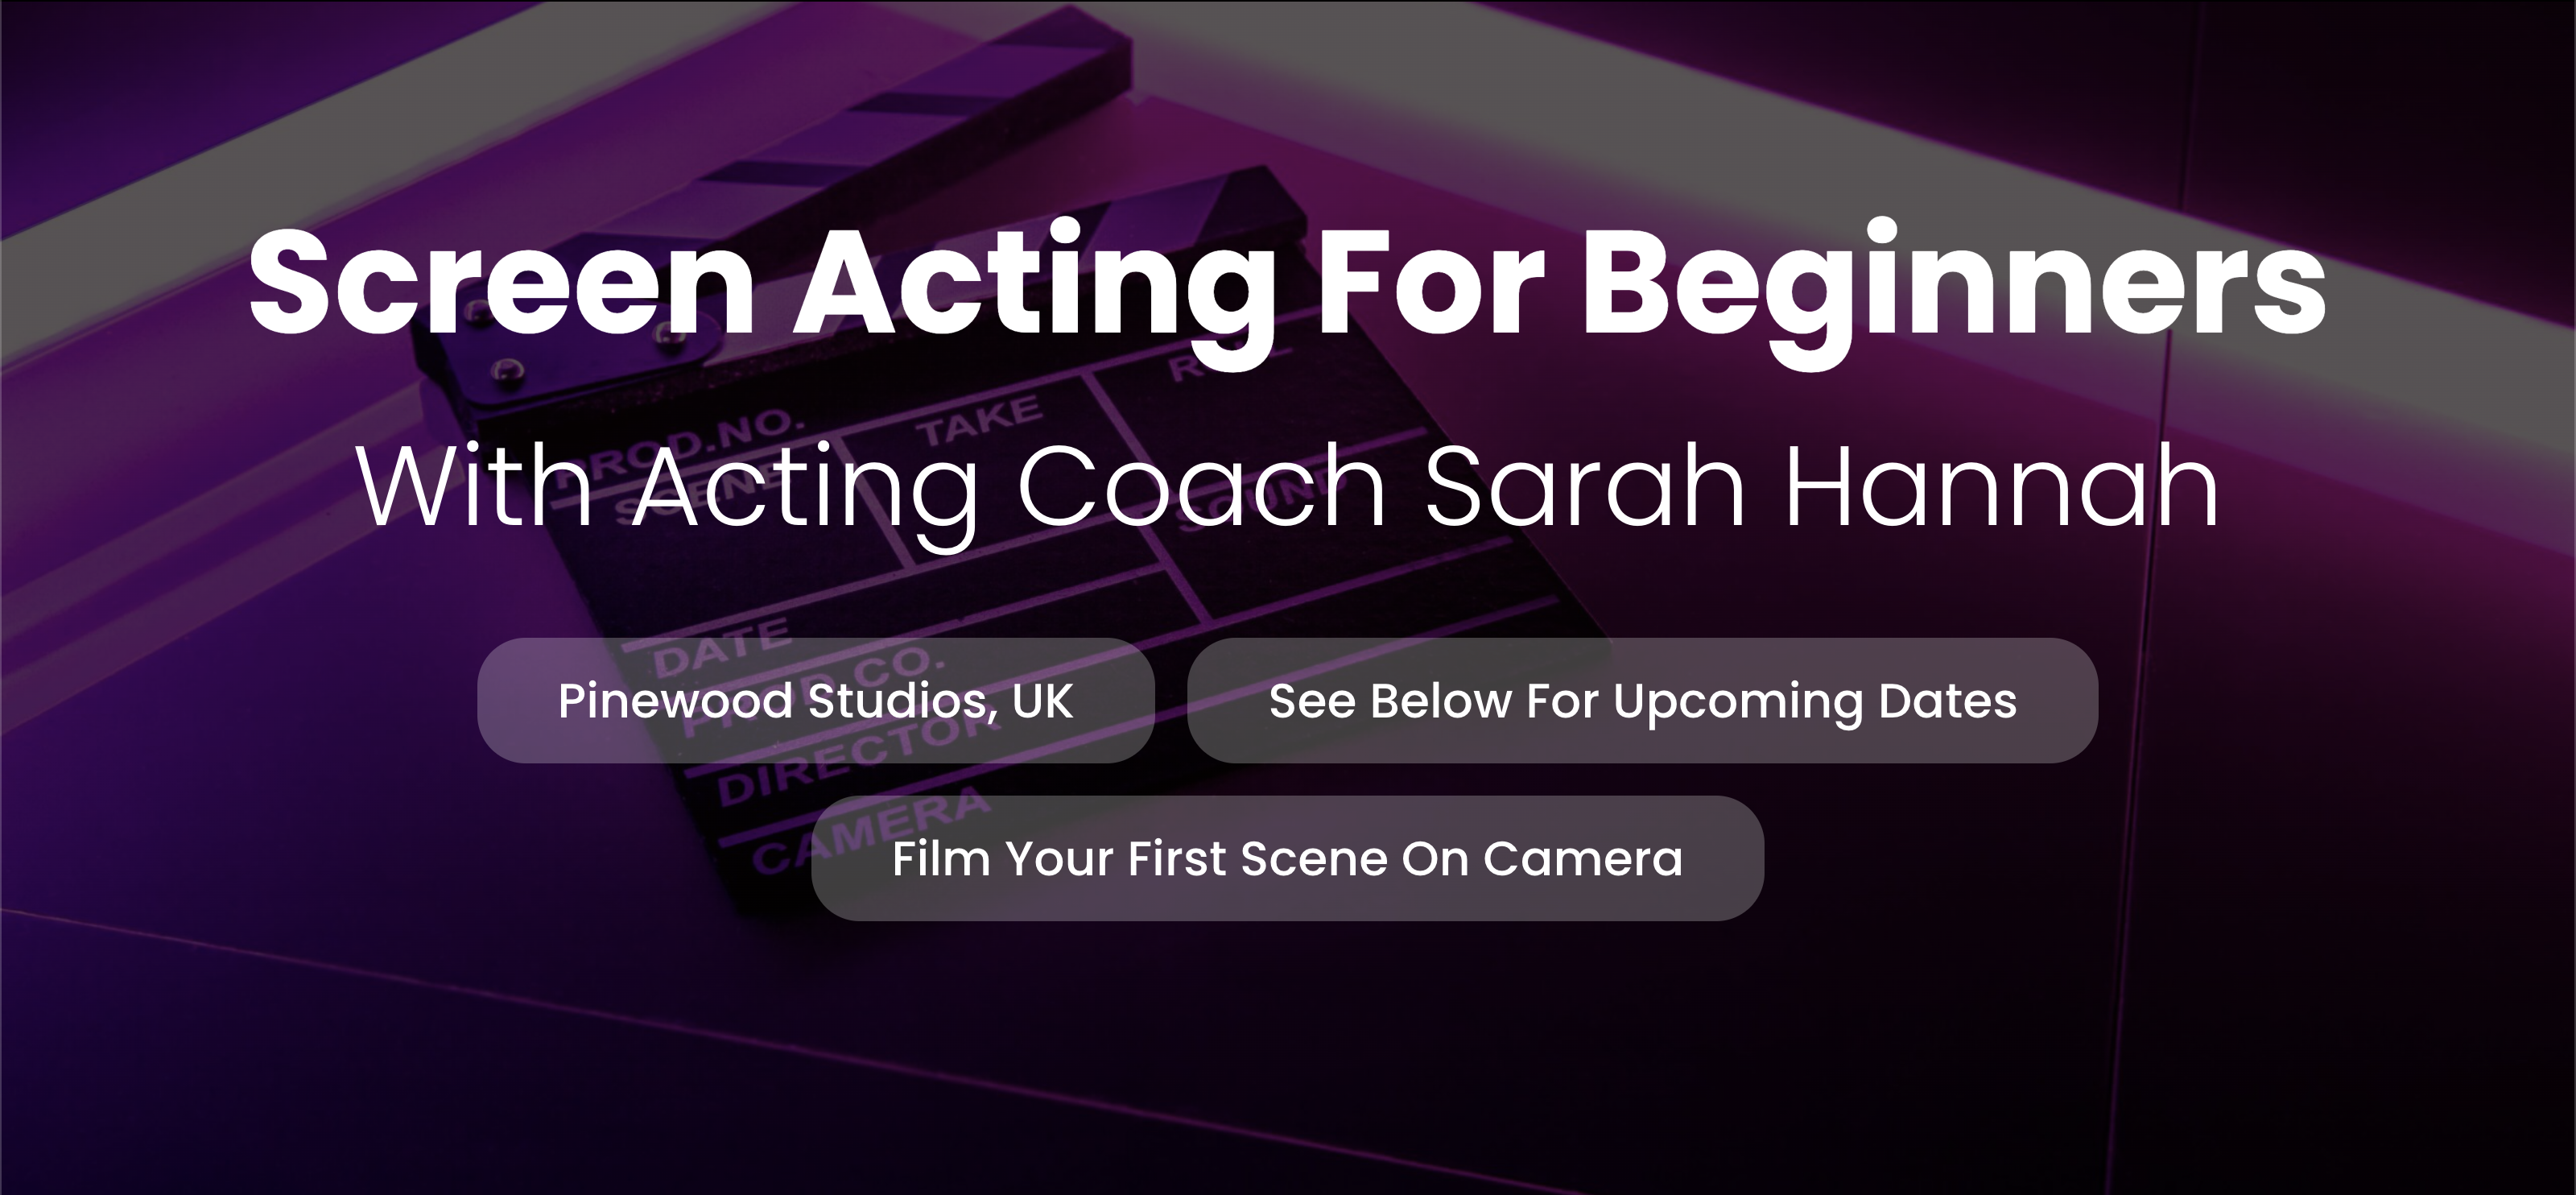 Screen Acting For Beginners